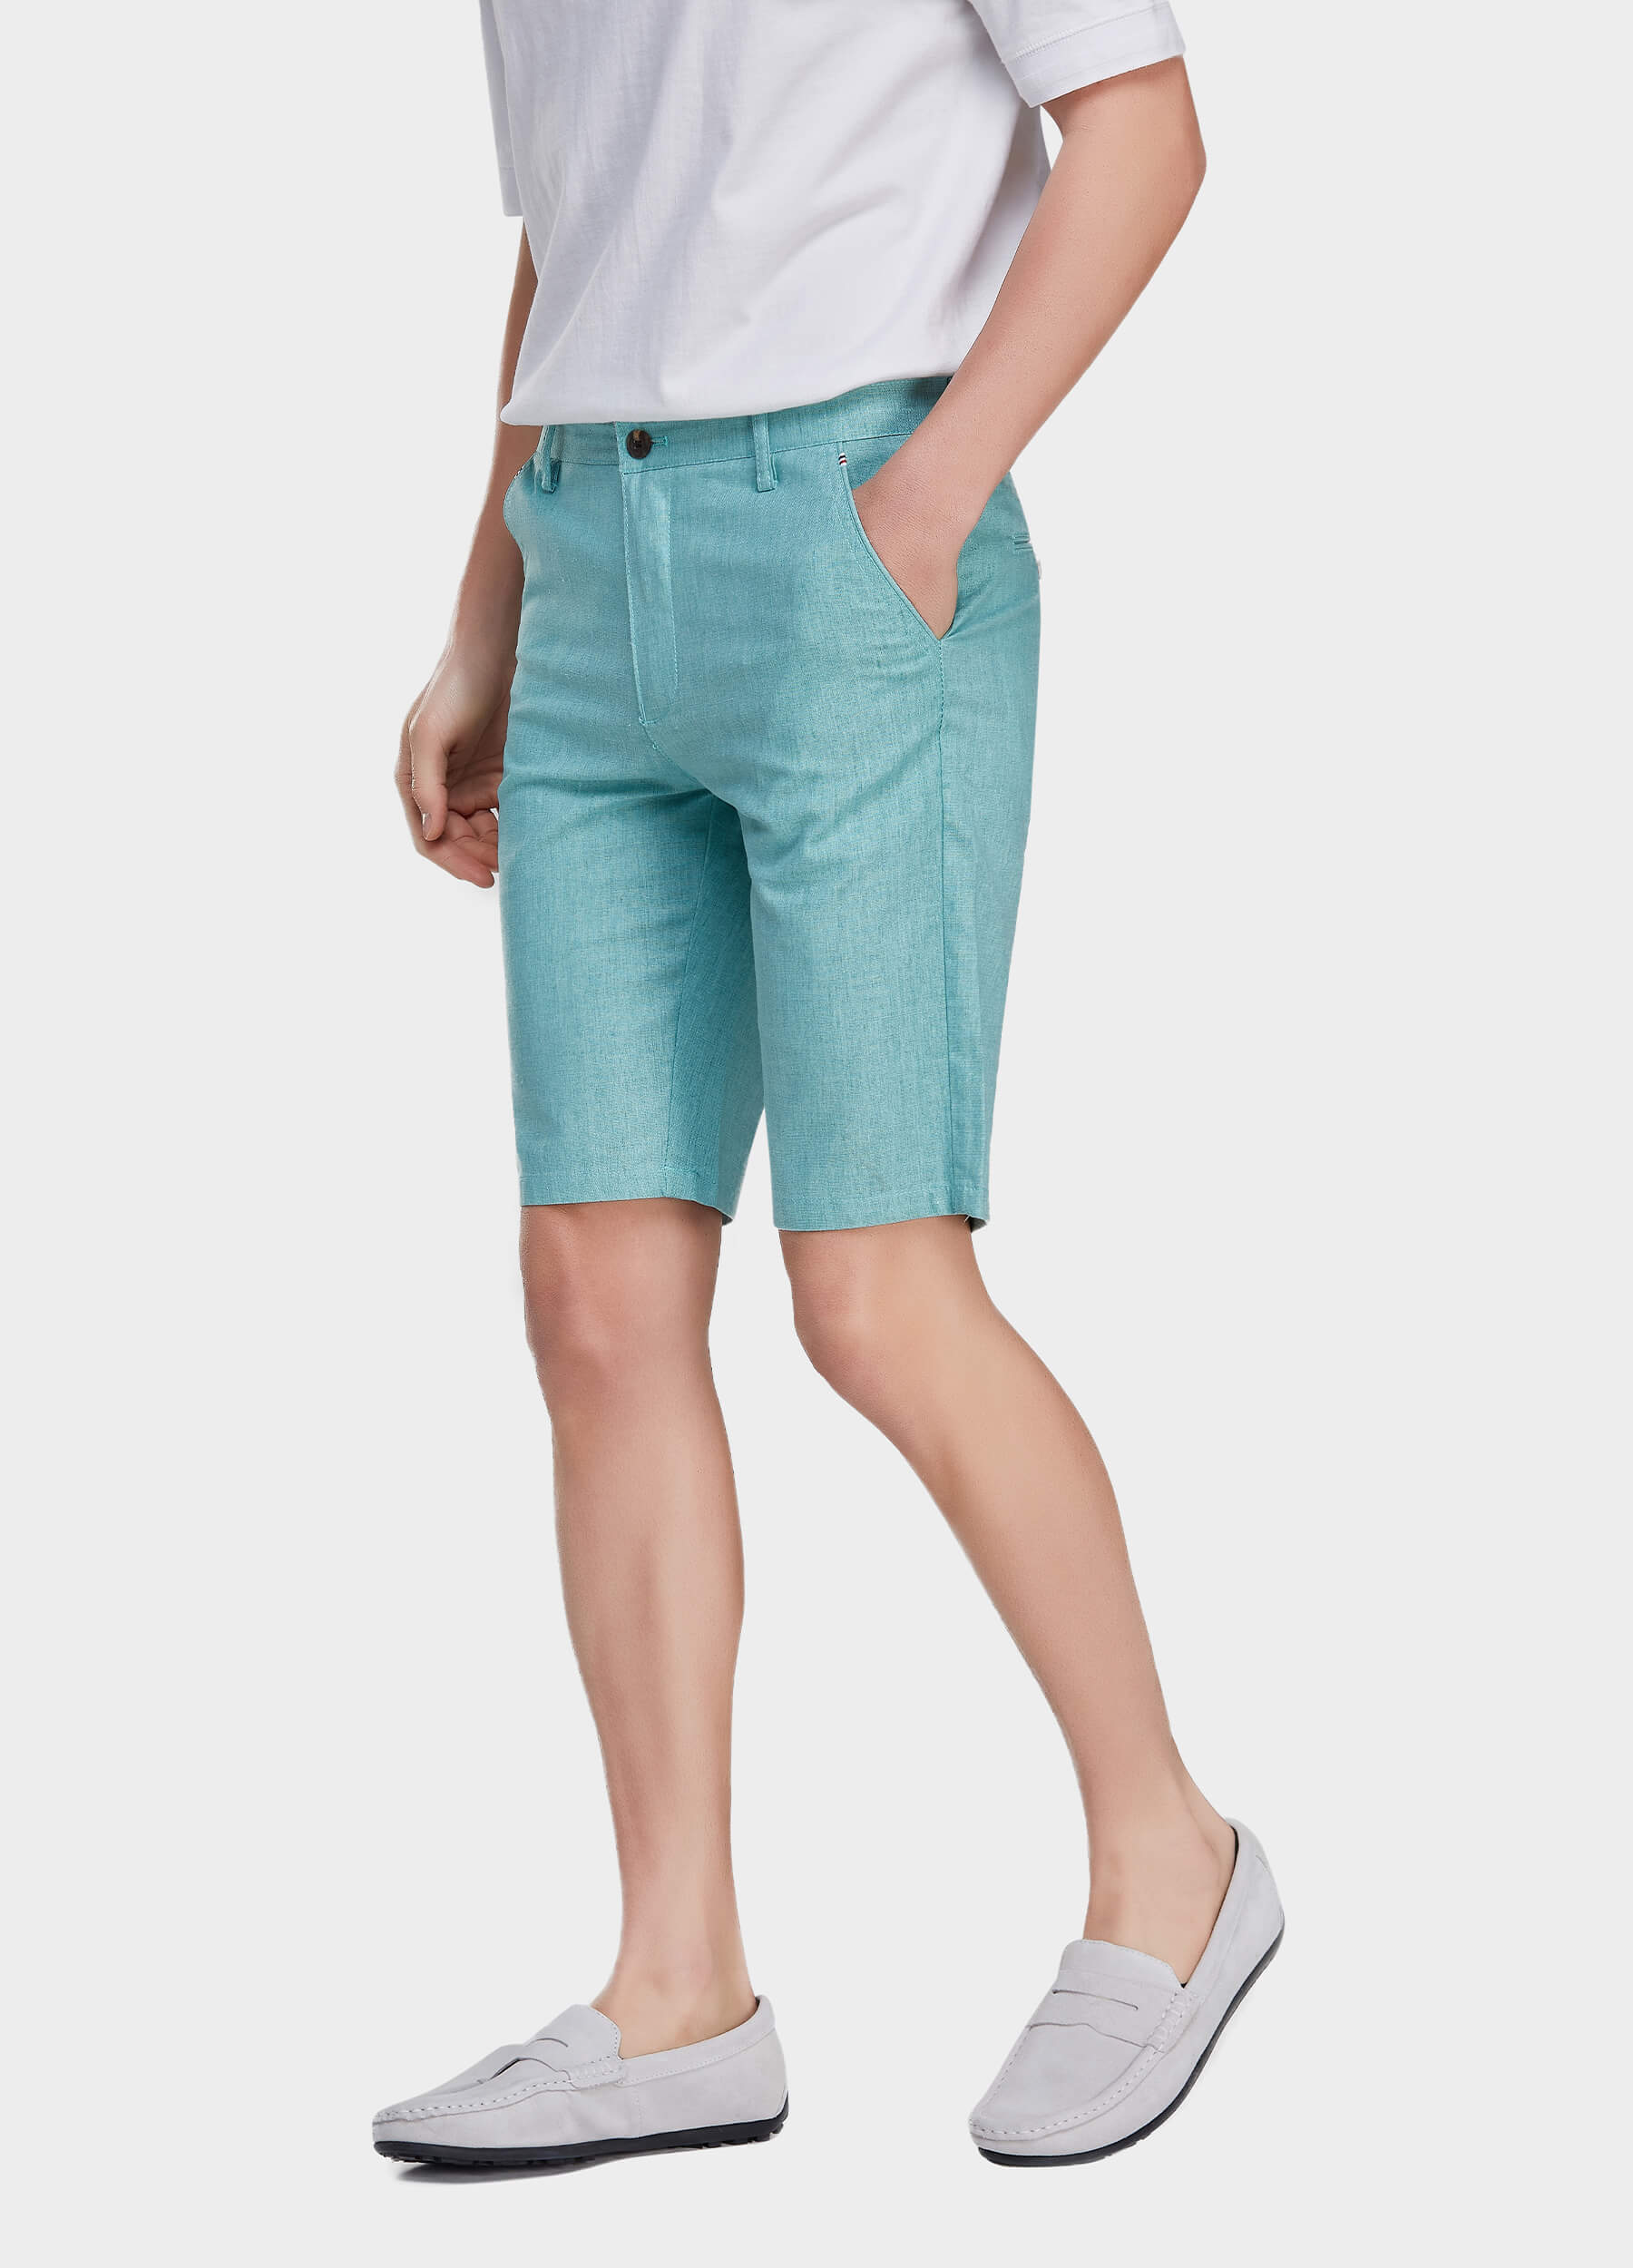 Men's Casual Solid Zipper Fly Button Walk Shorts with Slant Pockets-Lake Blue